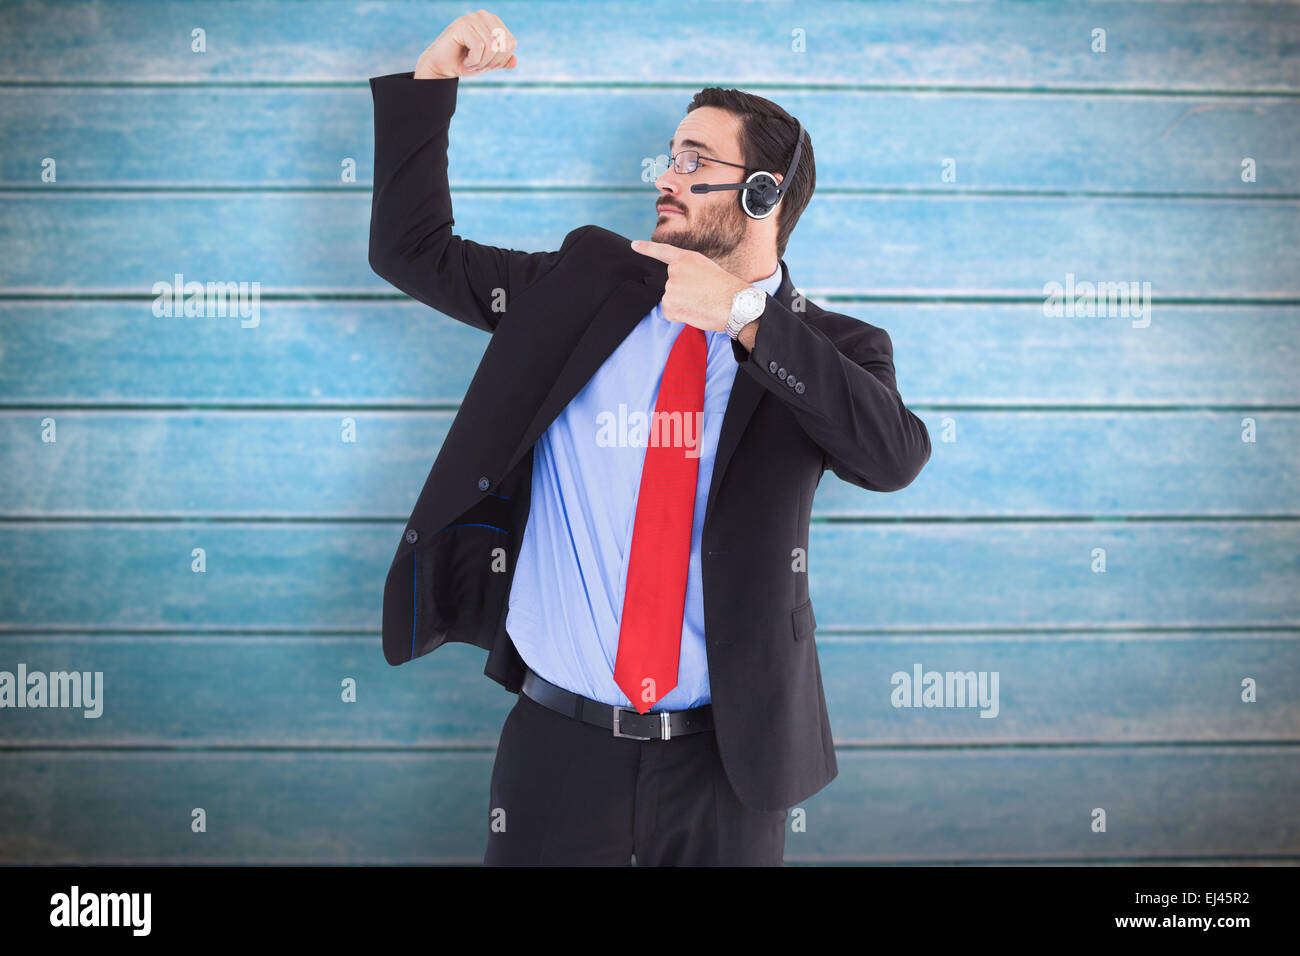 Composite image of smiling man wearing a headset while pointing his bicep Stock Photo